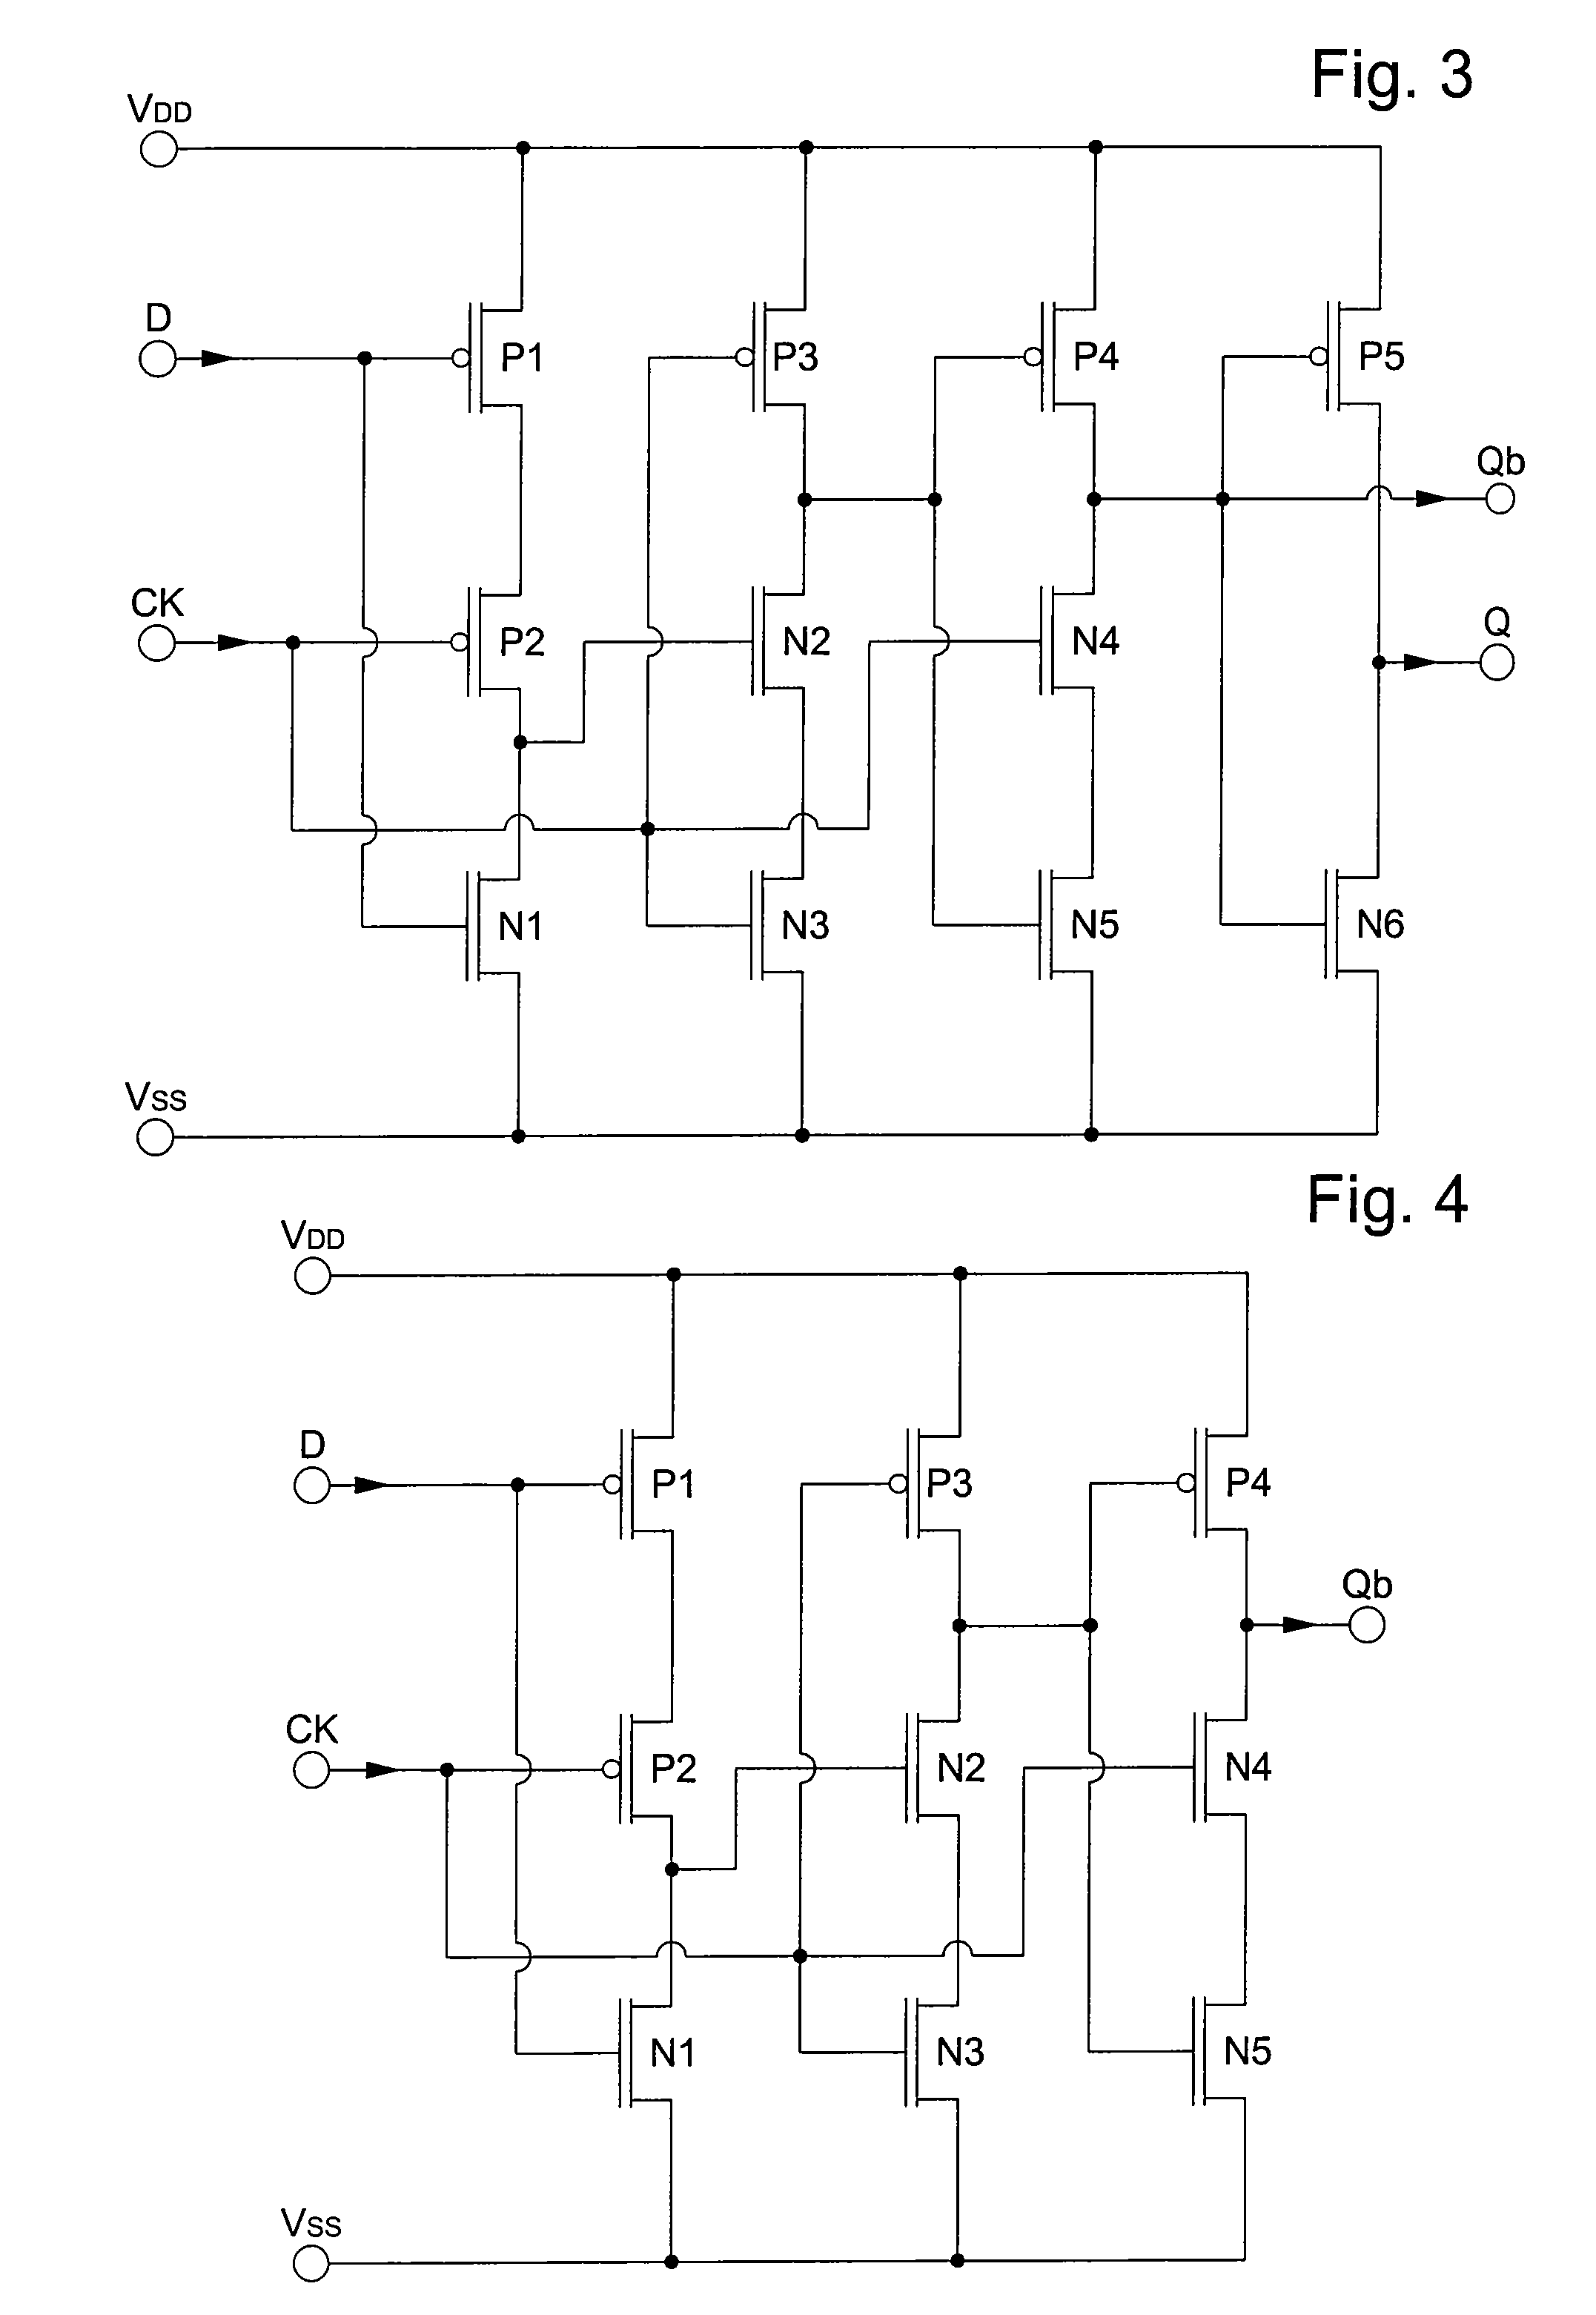 Dual-modulus prescaler circuit operating at a very high frequency